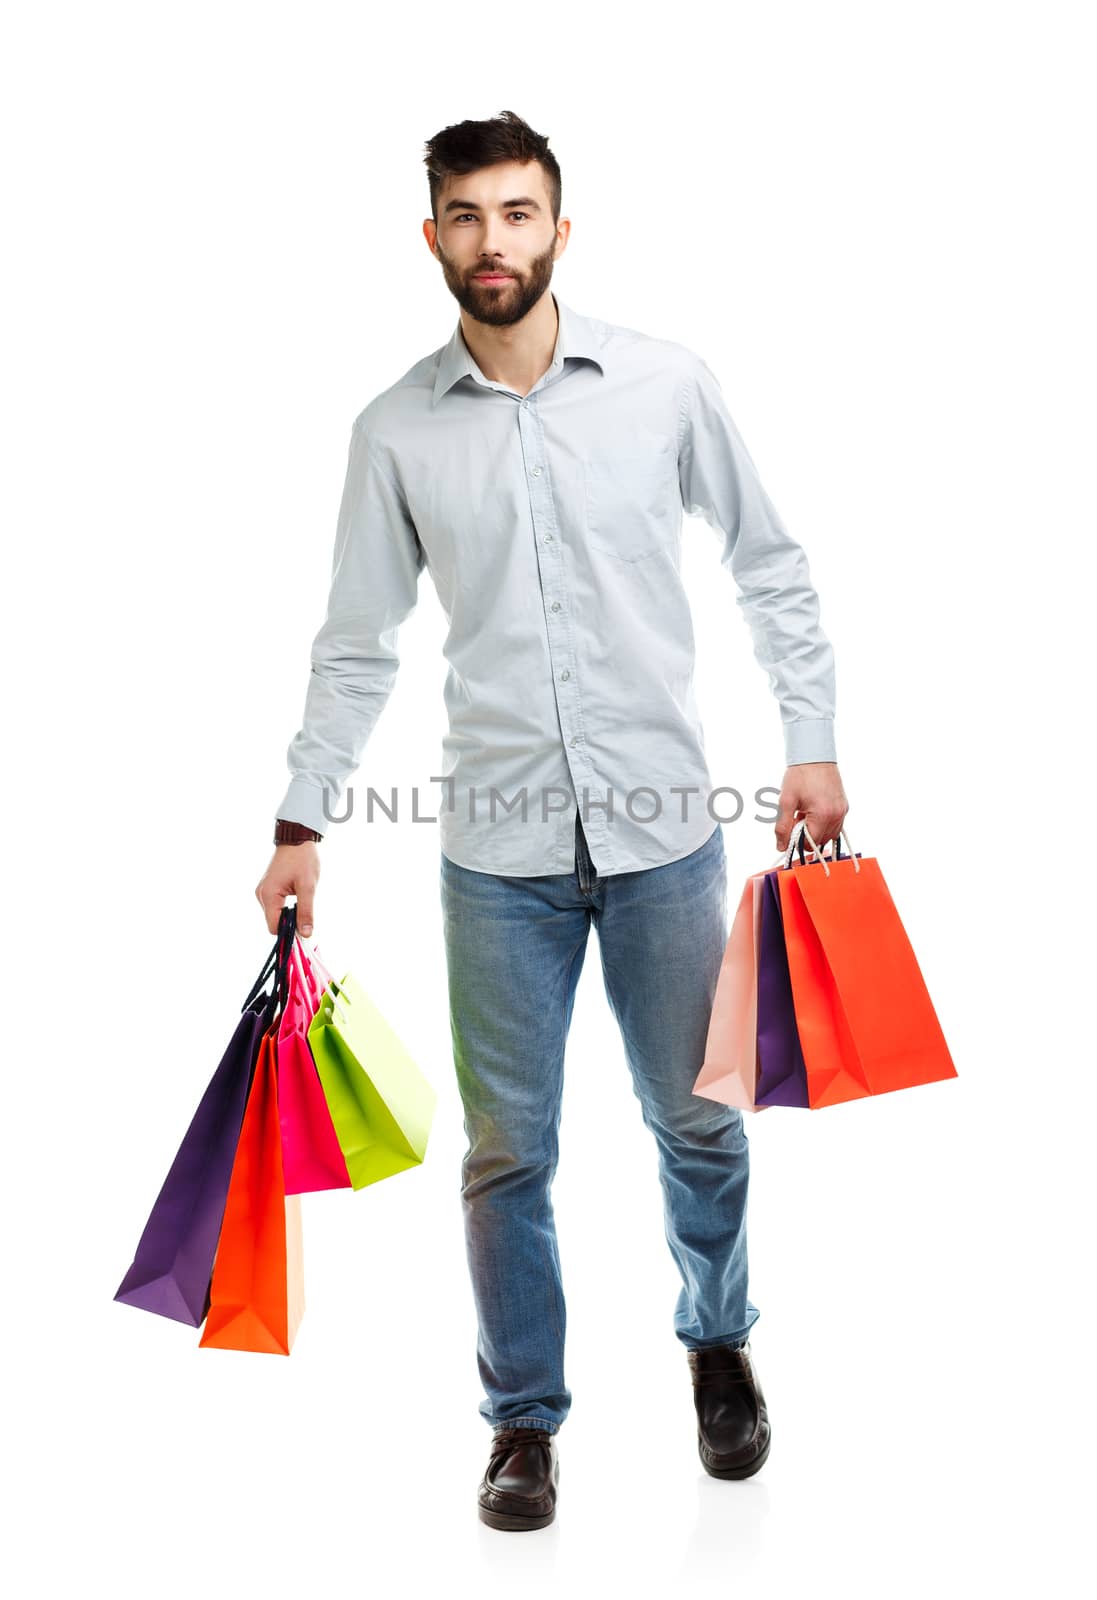 Handsome man holding shopping bags. Christmas and holidays concept